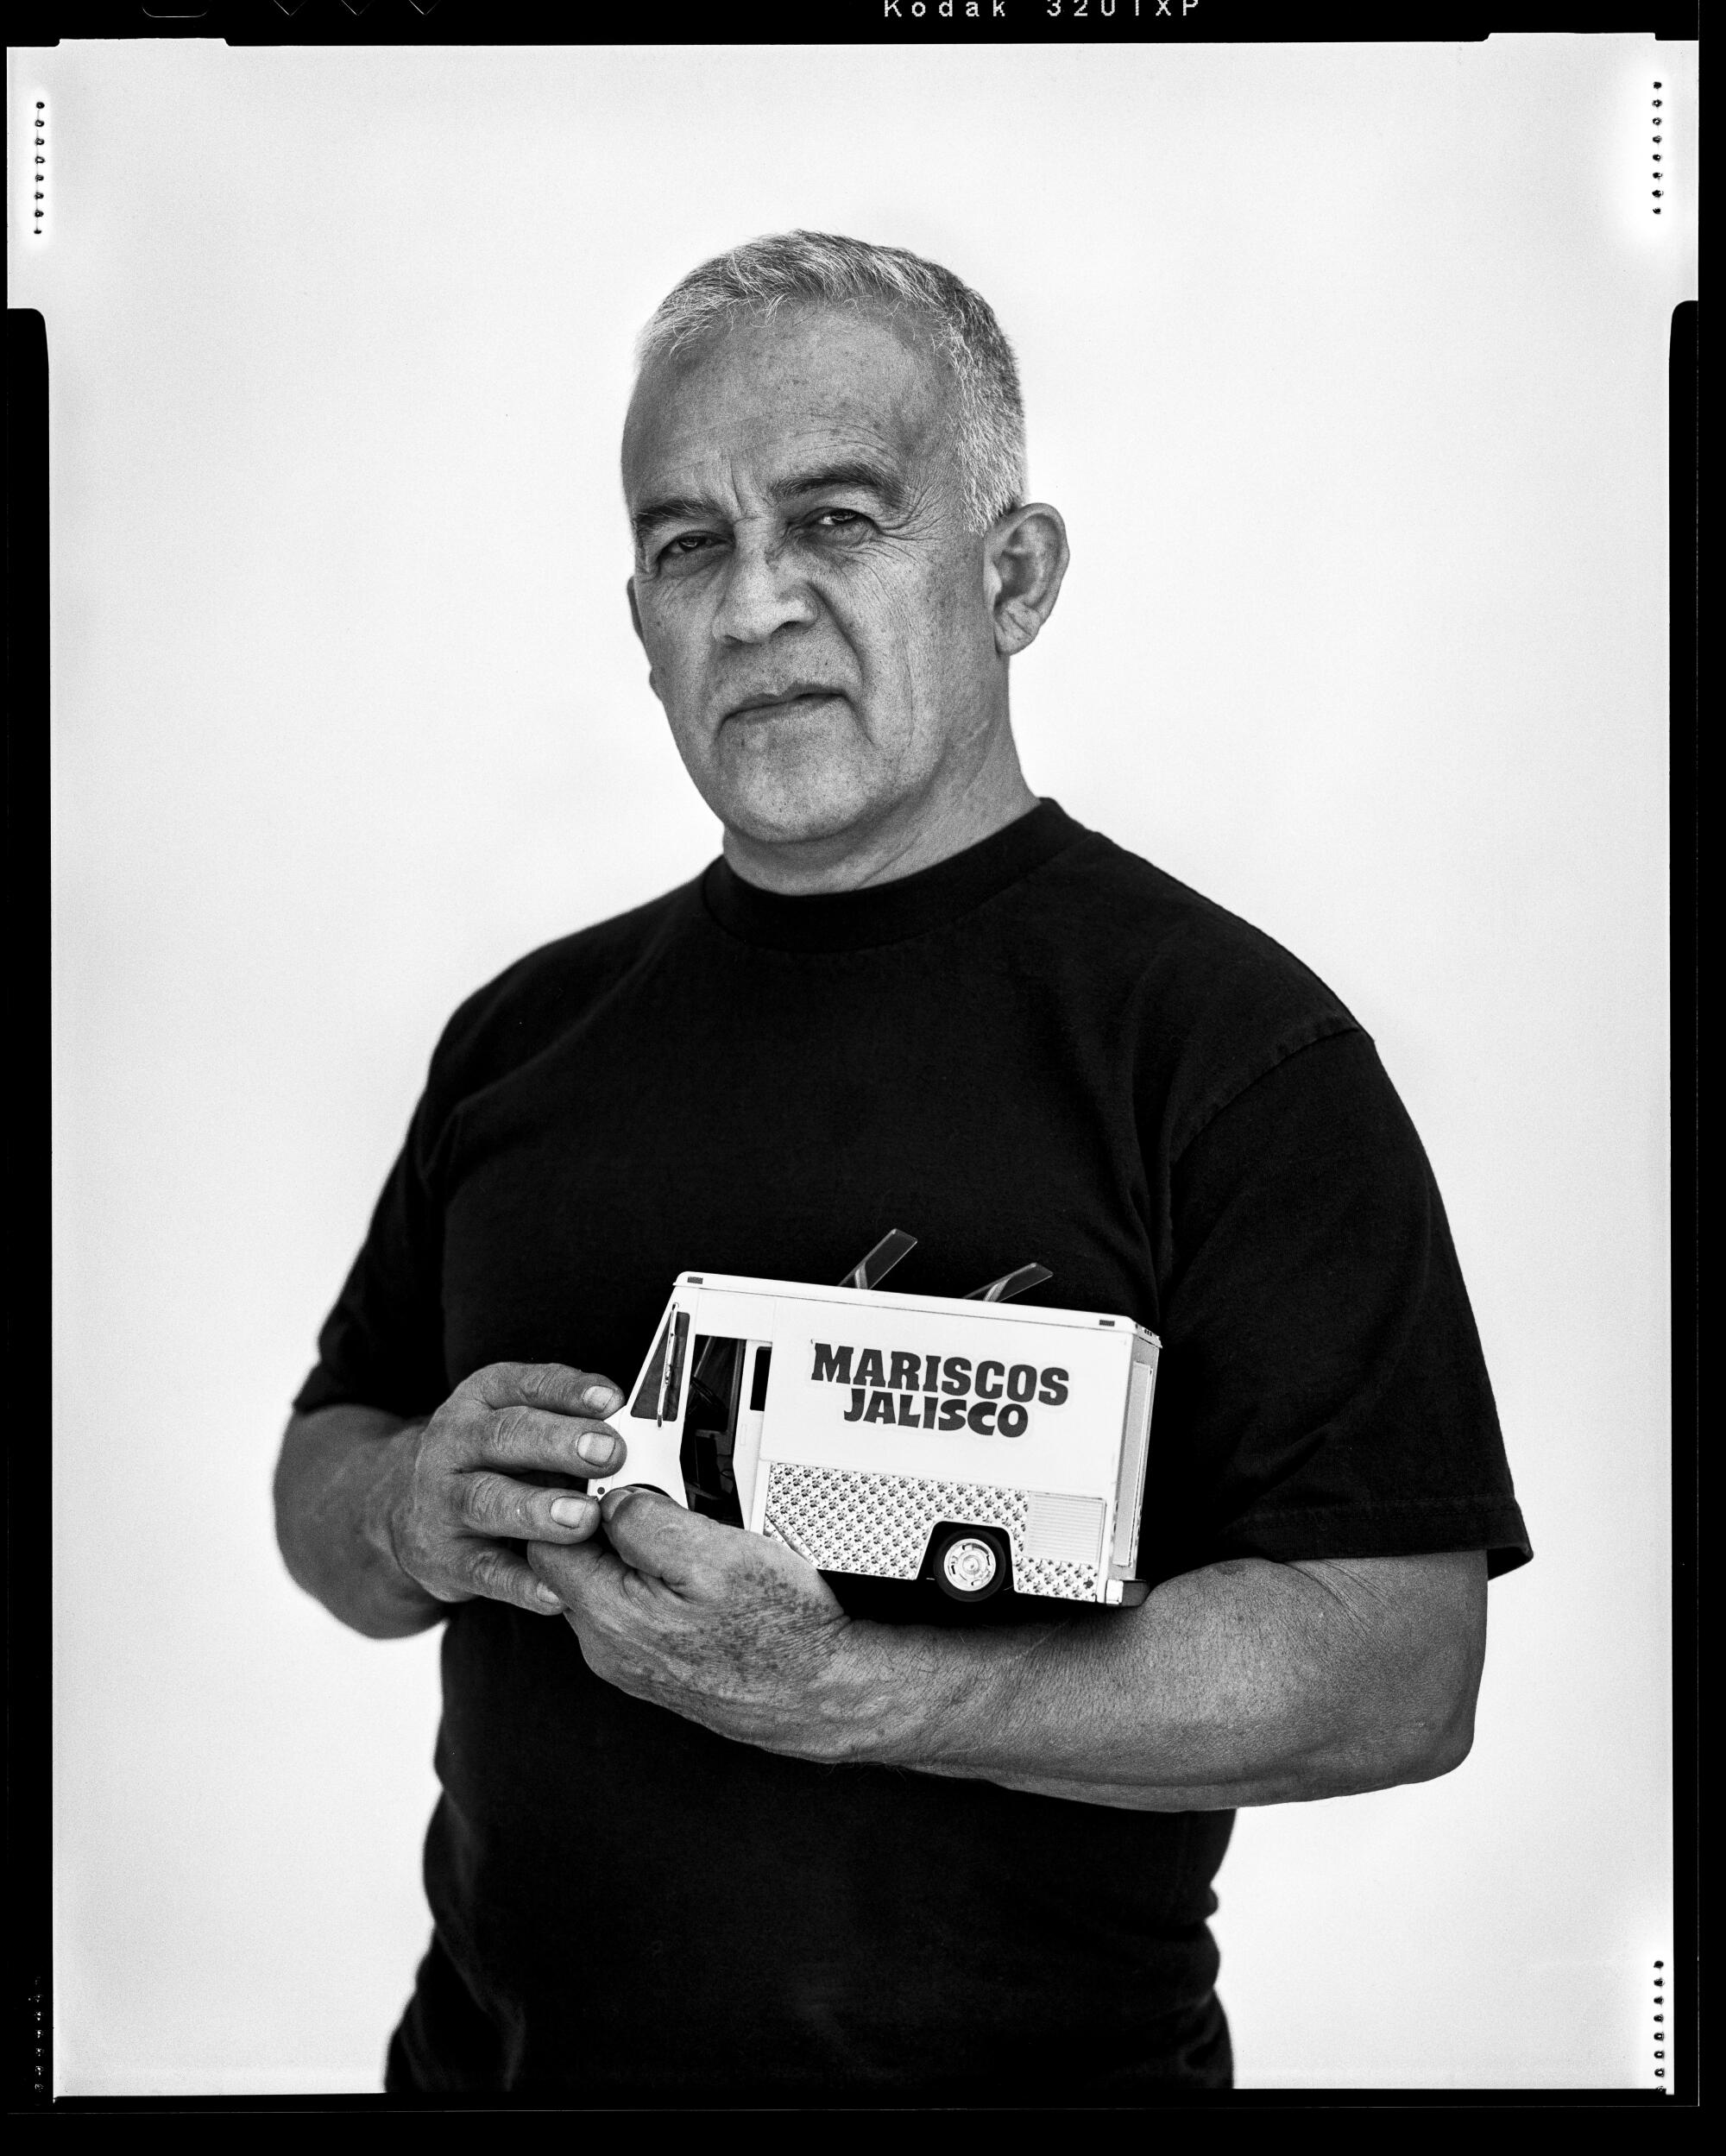 Raul Ortega is photographed with a miniature food truck 